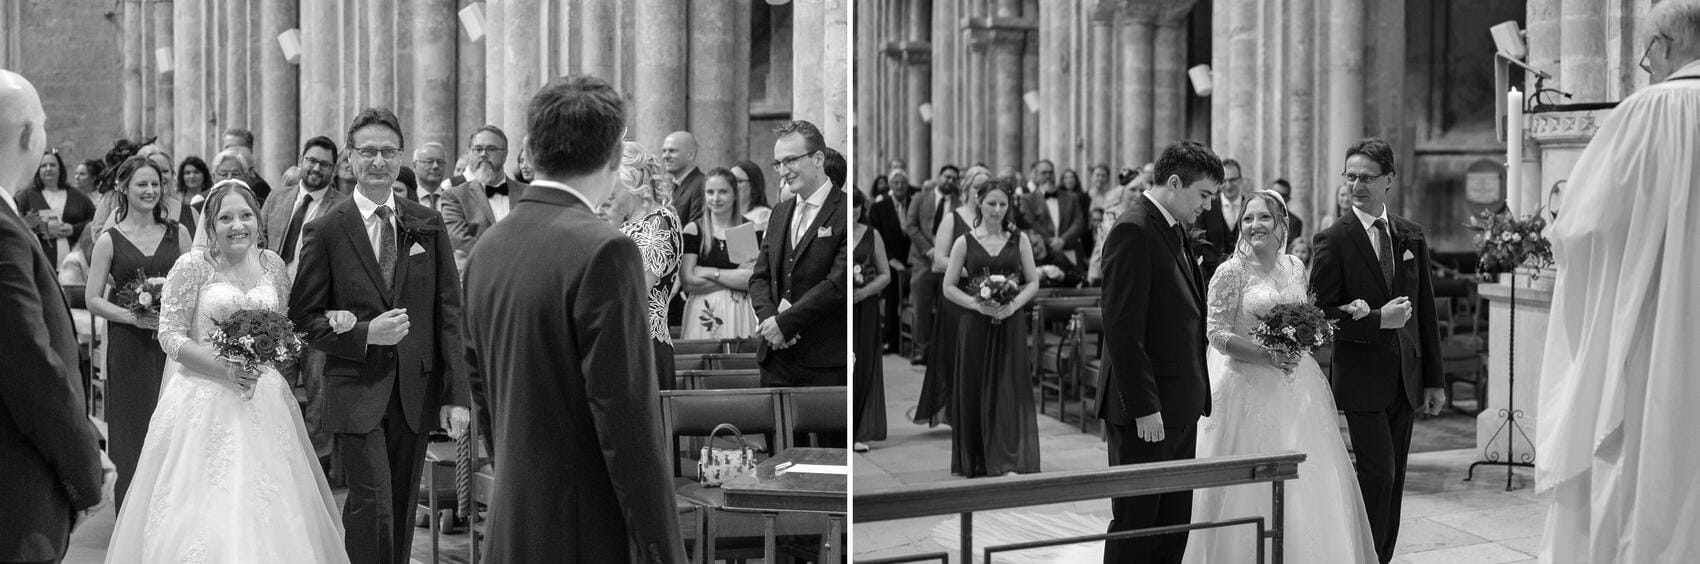 Bride walking the aisle at Christchurch Priory wedding ceremony